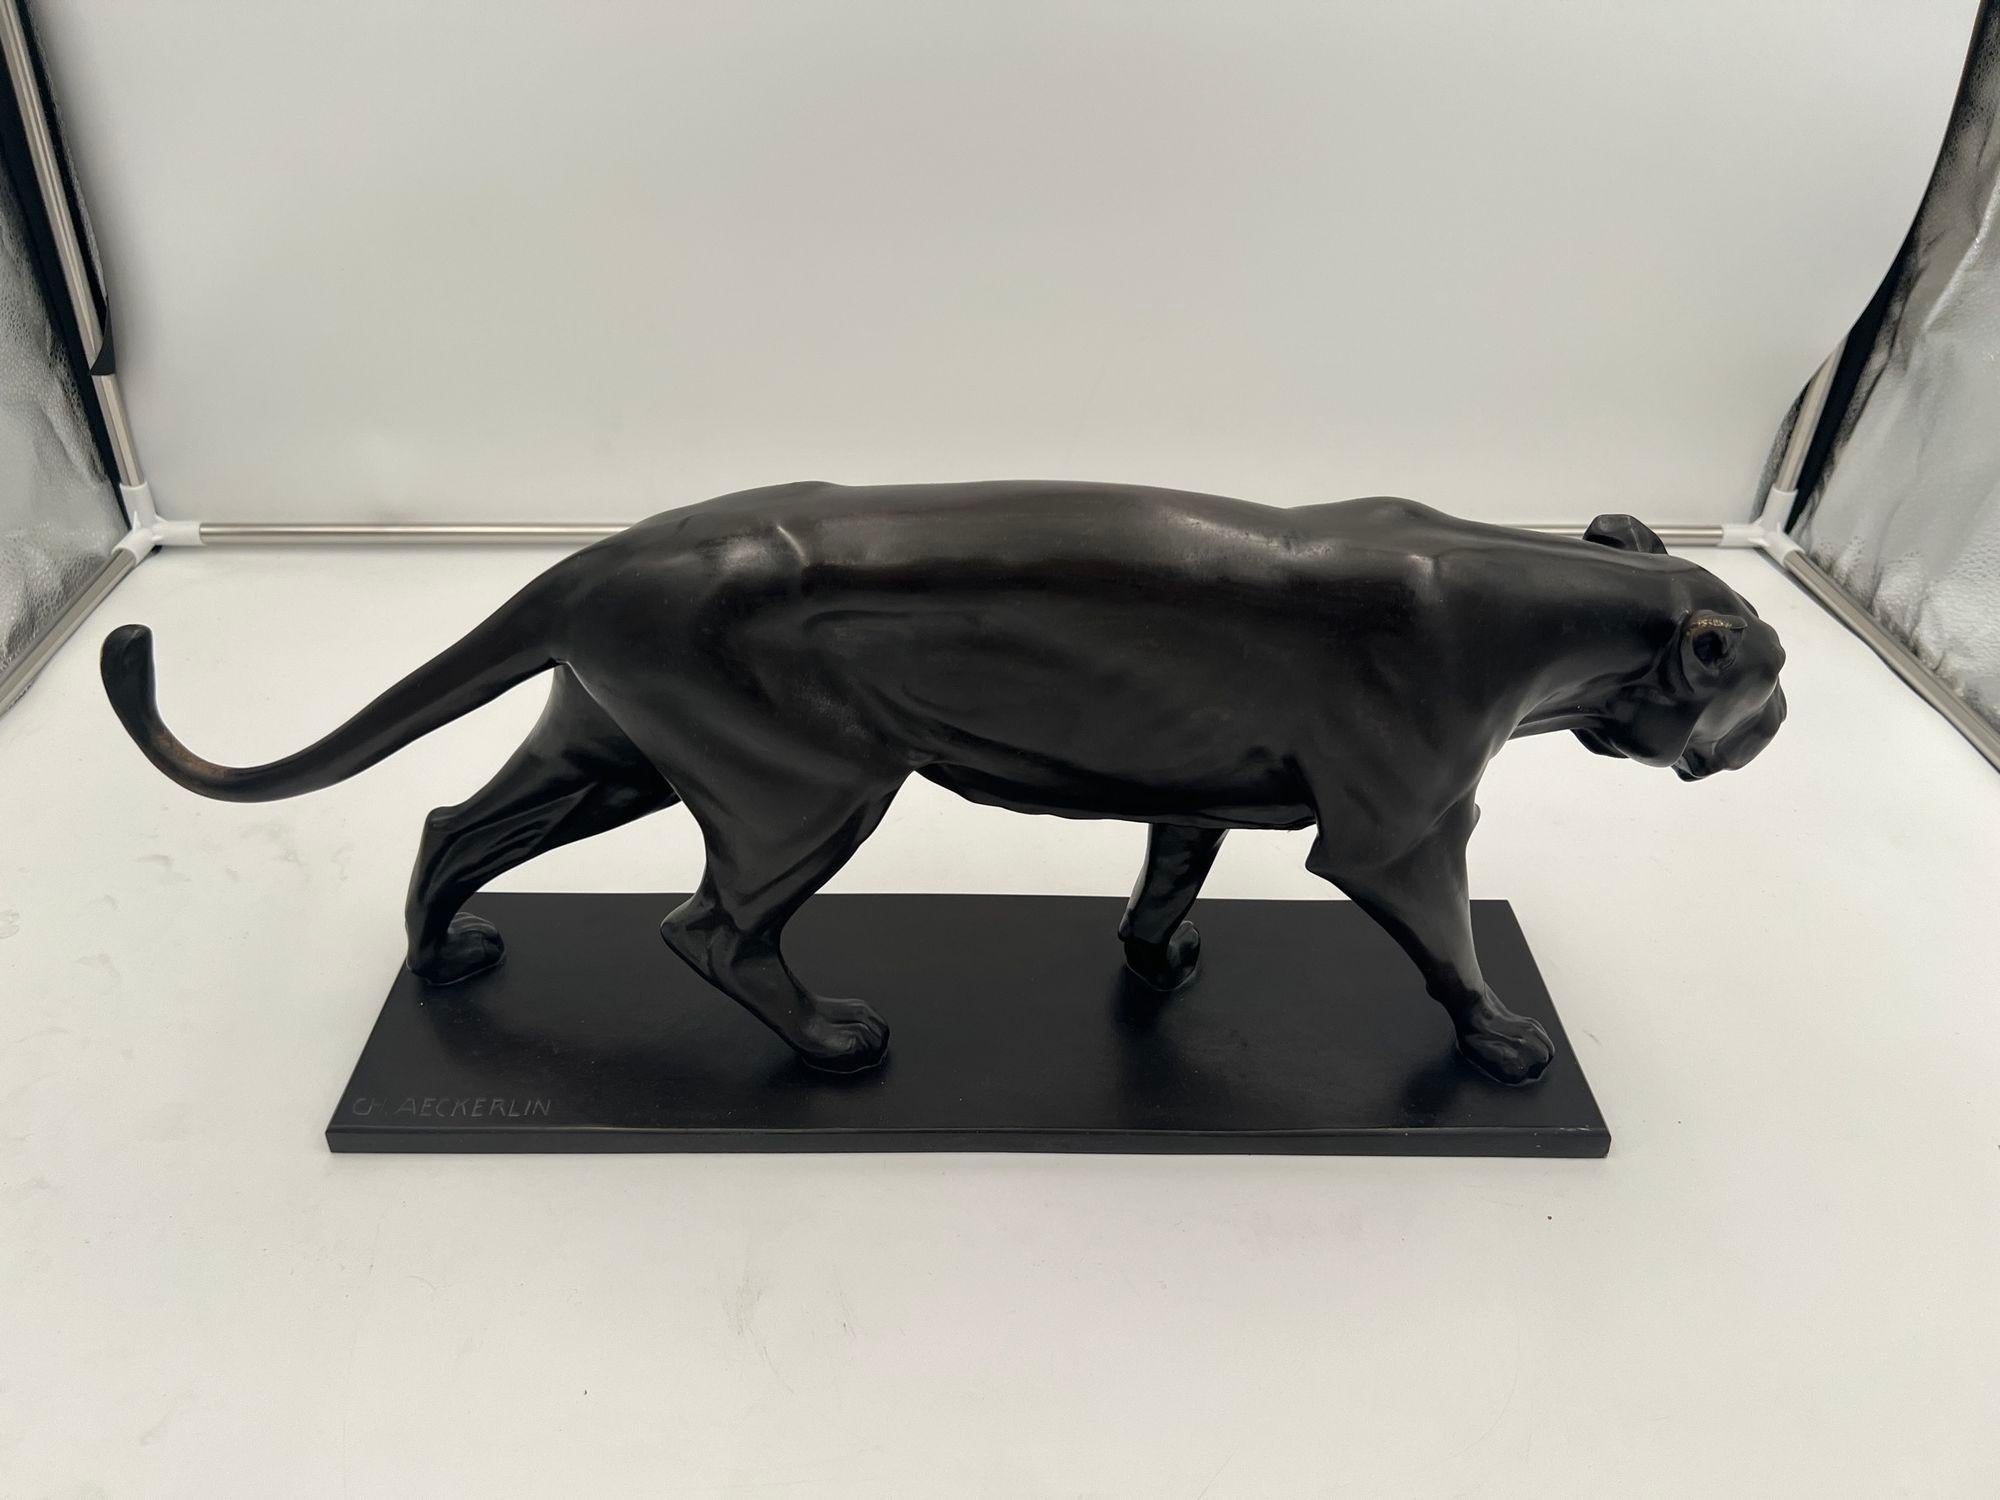 Cast Art Deco Bronze Sculpture of a Lioness by Ch. Aeckerlin, Germany circa 1930 For Sale